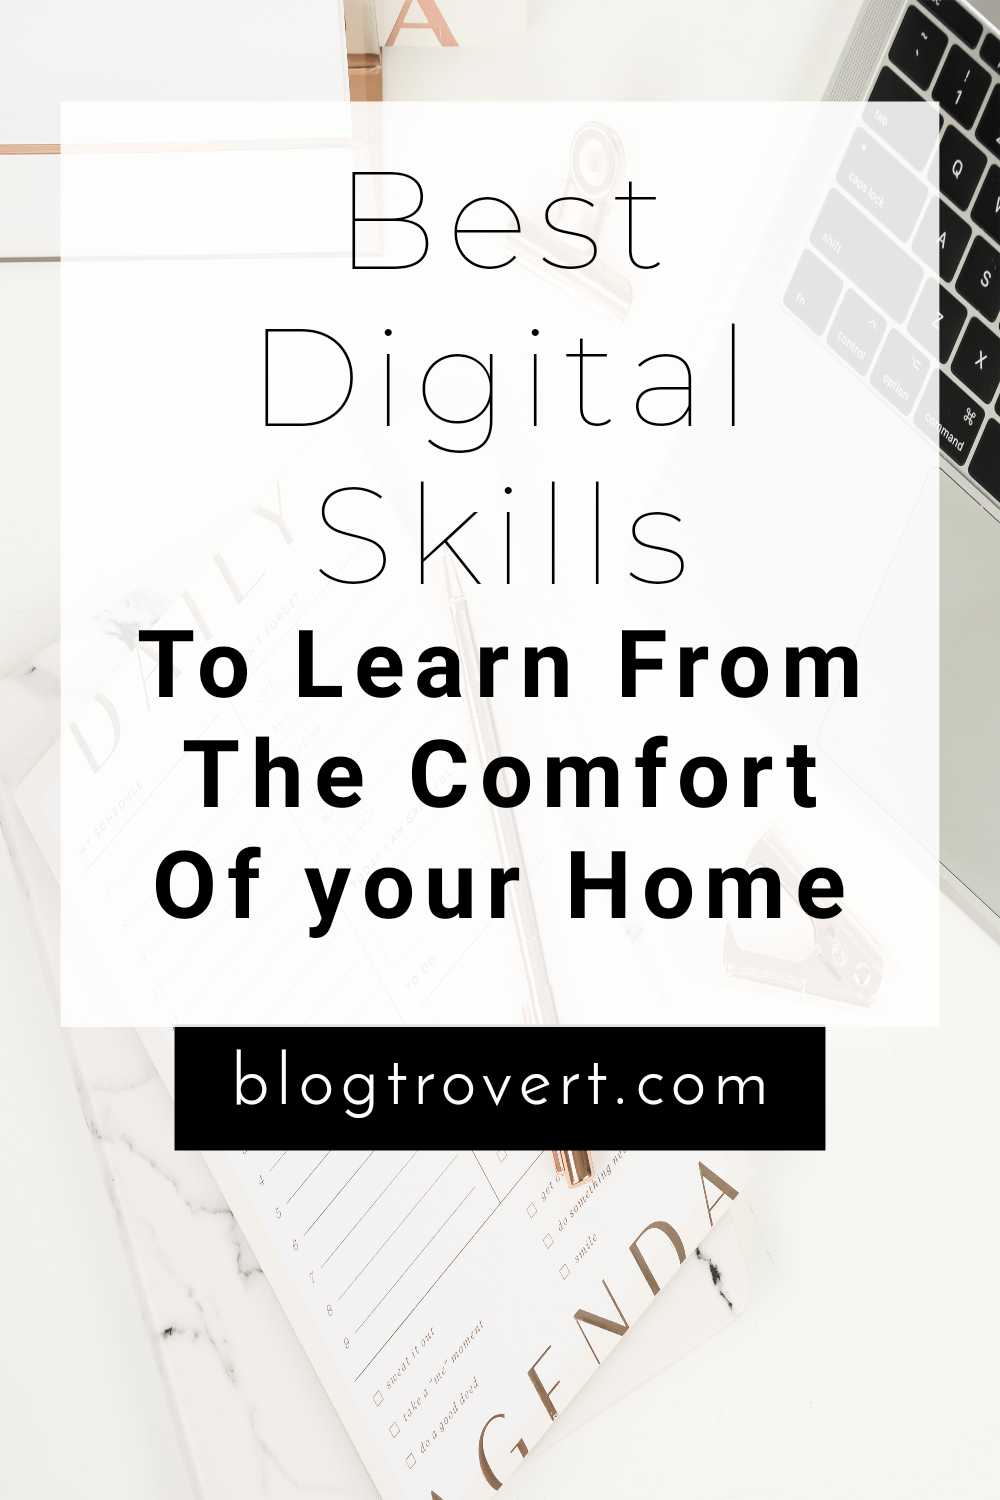 5 of the Best Digital Skills and Where to Learn Them 4